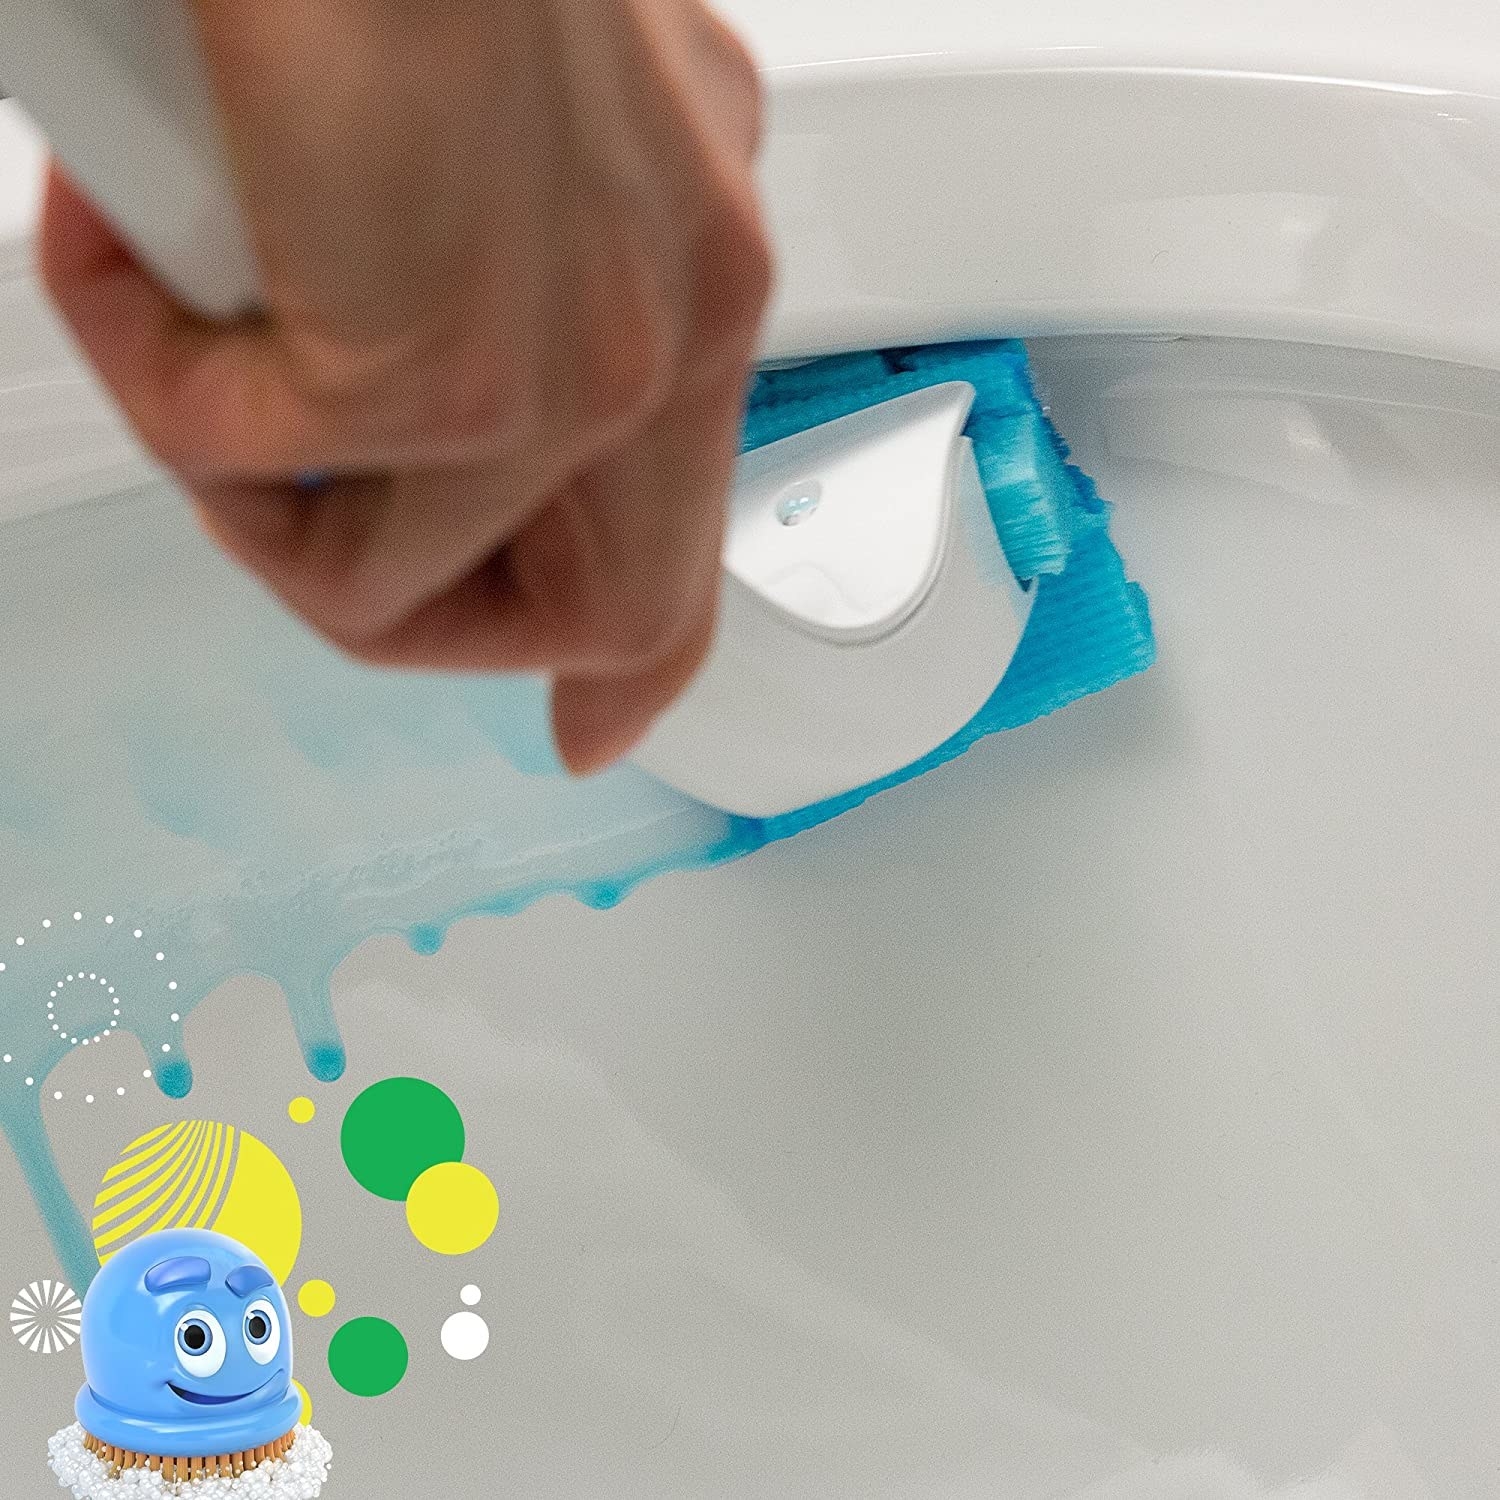 A hand cleaning a toilet bowl with the wand, with blue cleaning solution coming out of the pad